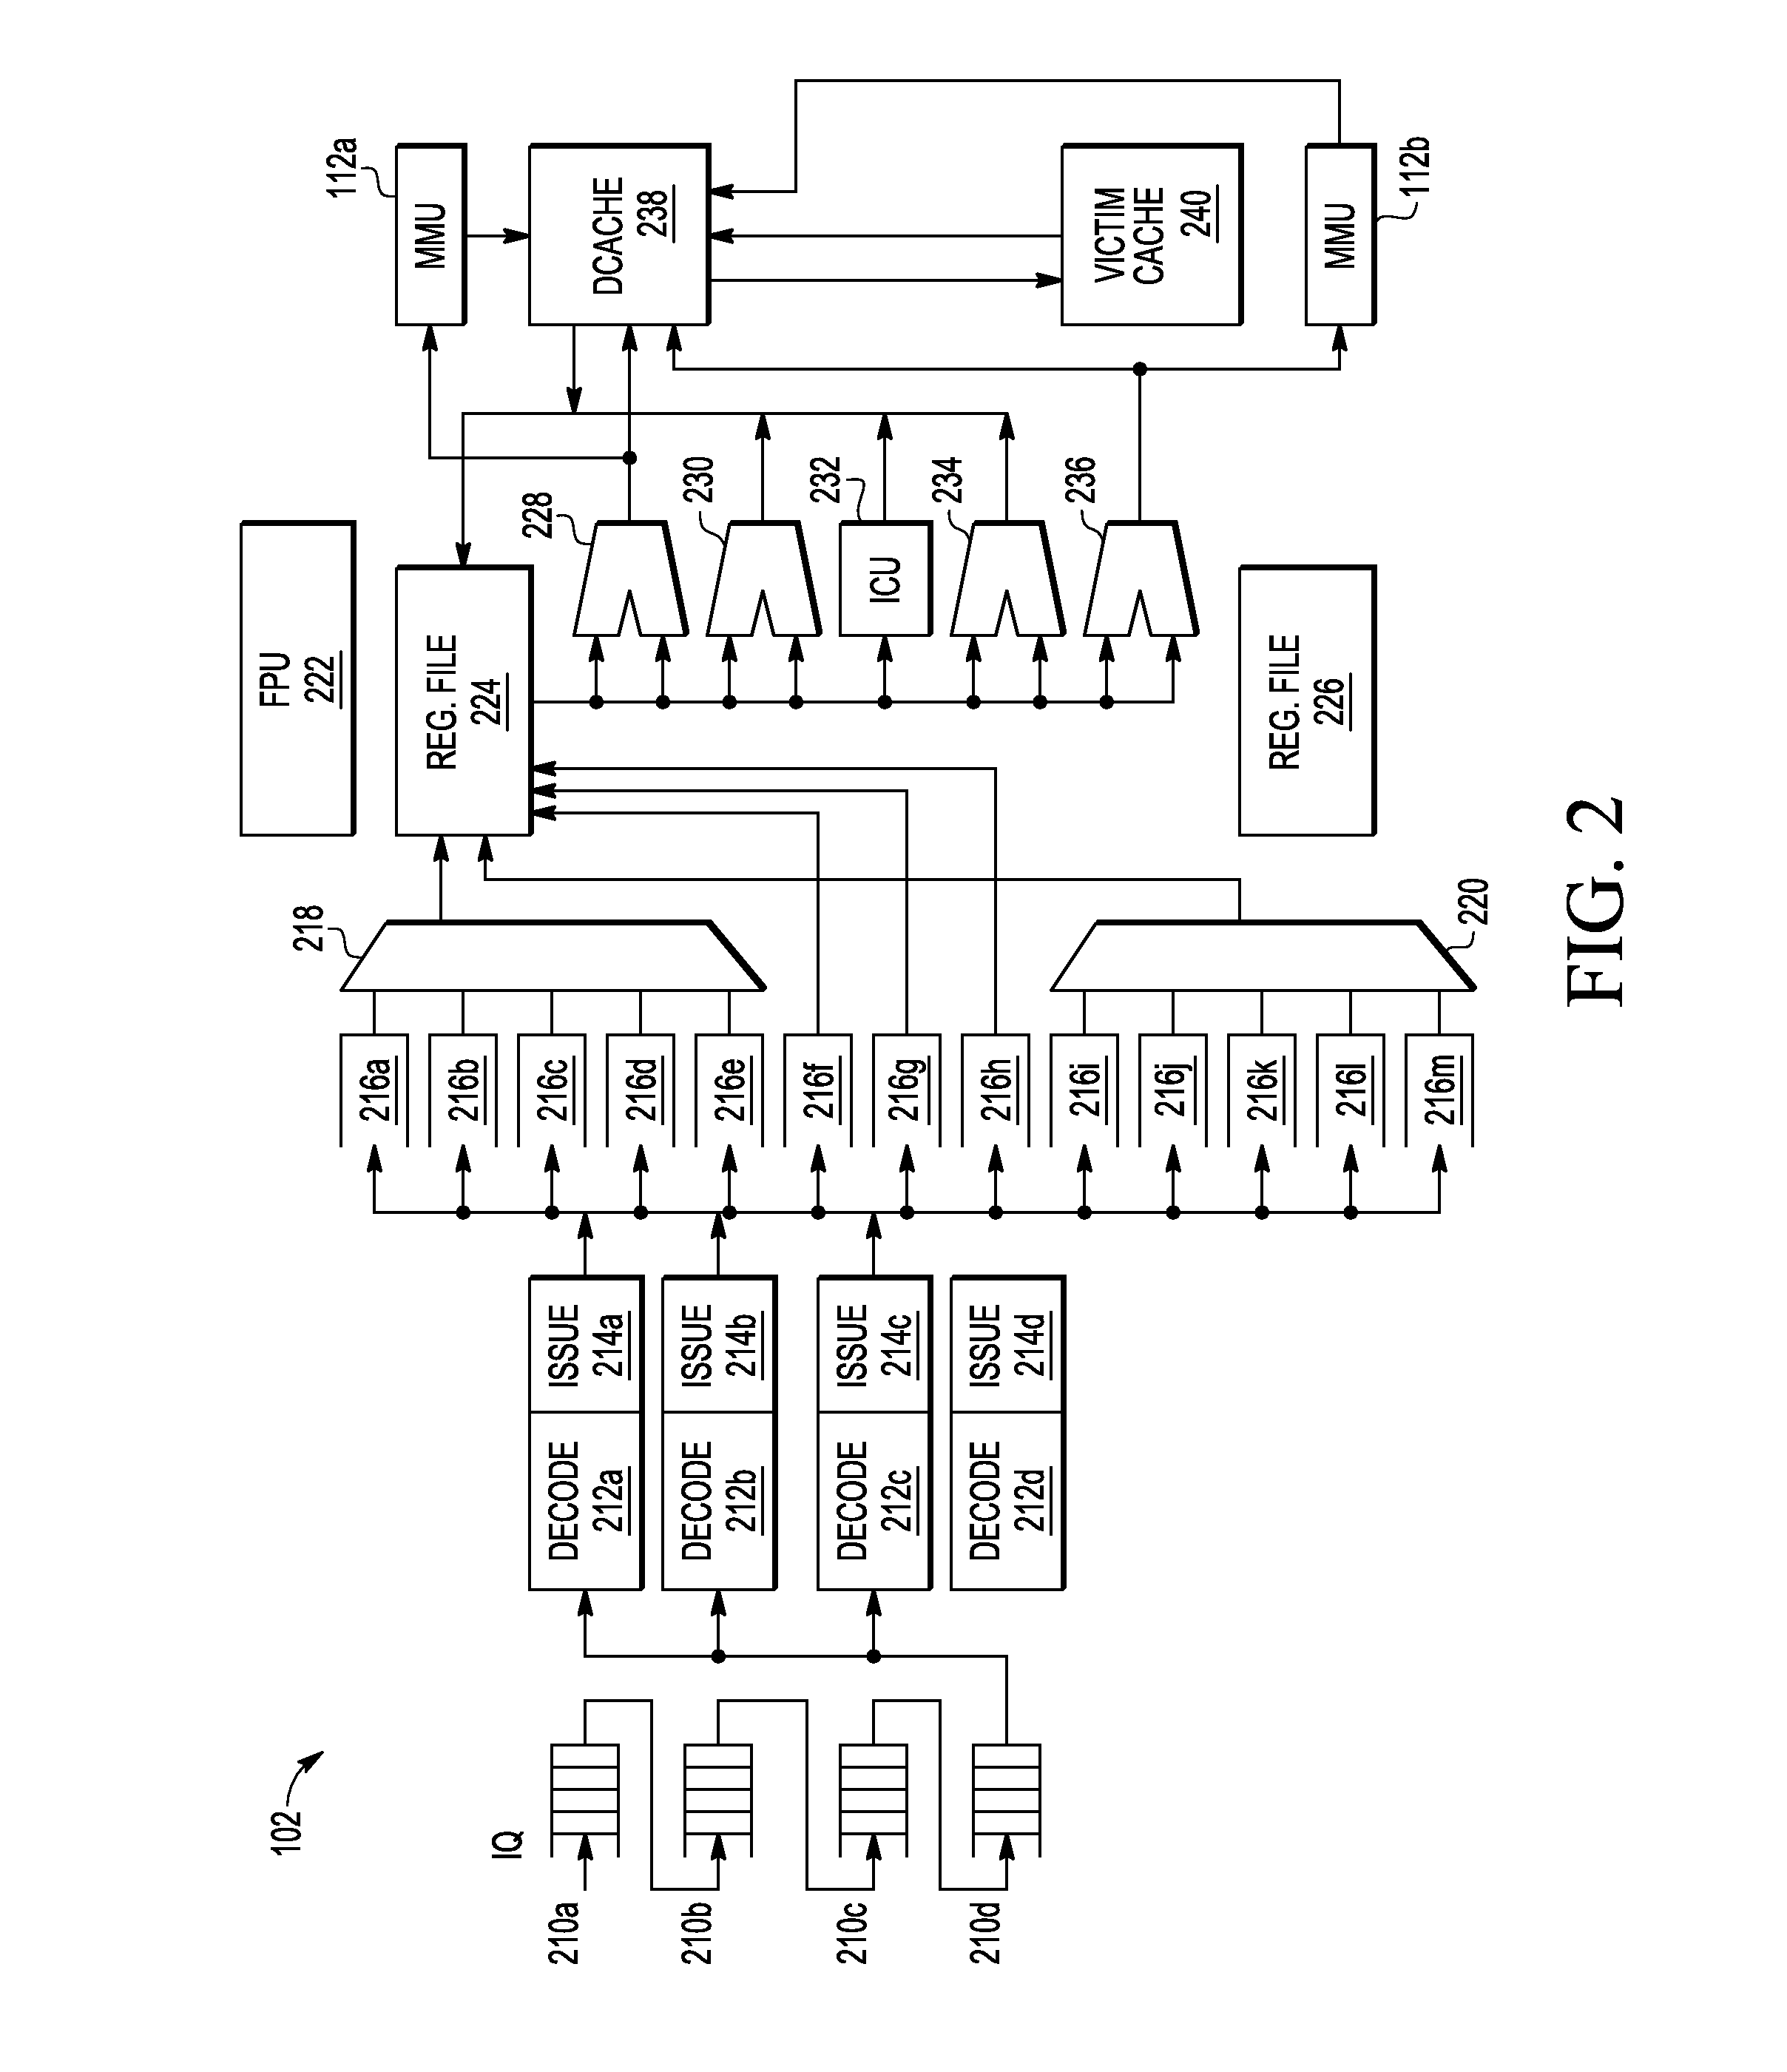 Systems and methods for reconfiguring cache memory